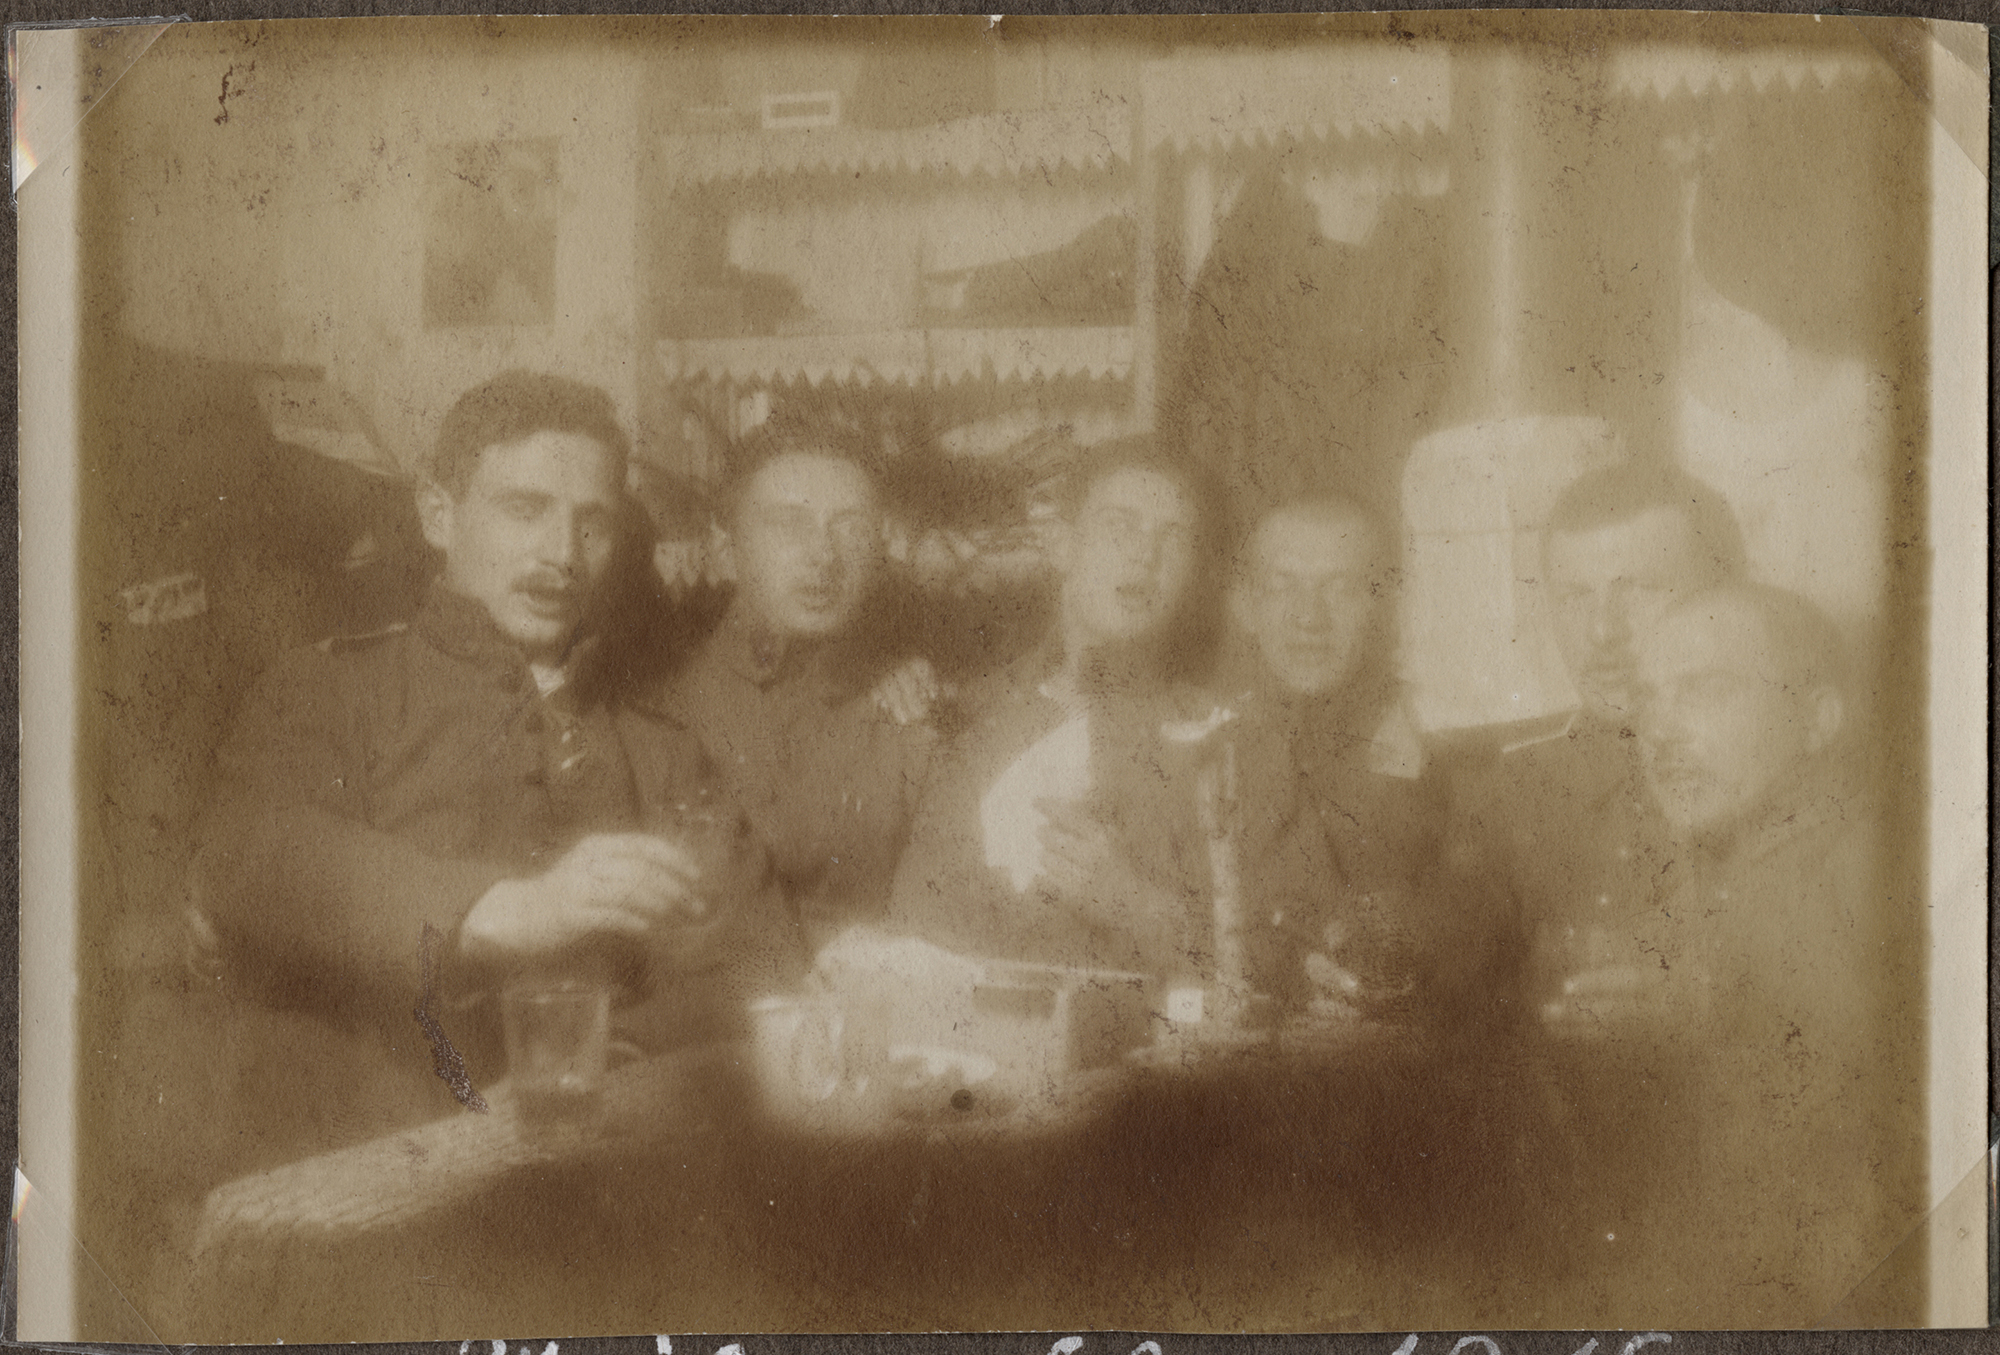 Fuzzy sepia picture of a group of soldiers seated around a table scattered with drinks and toasting the camera